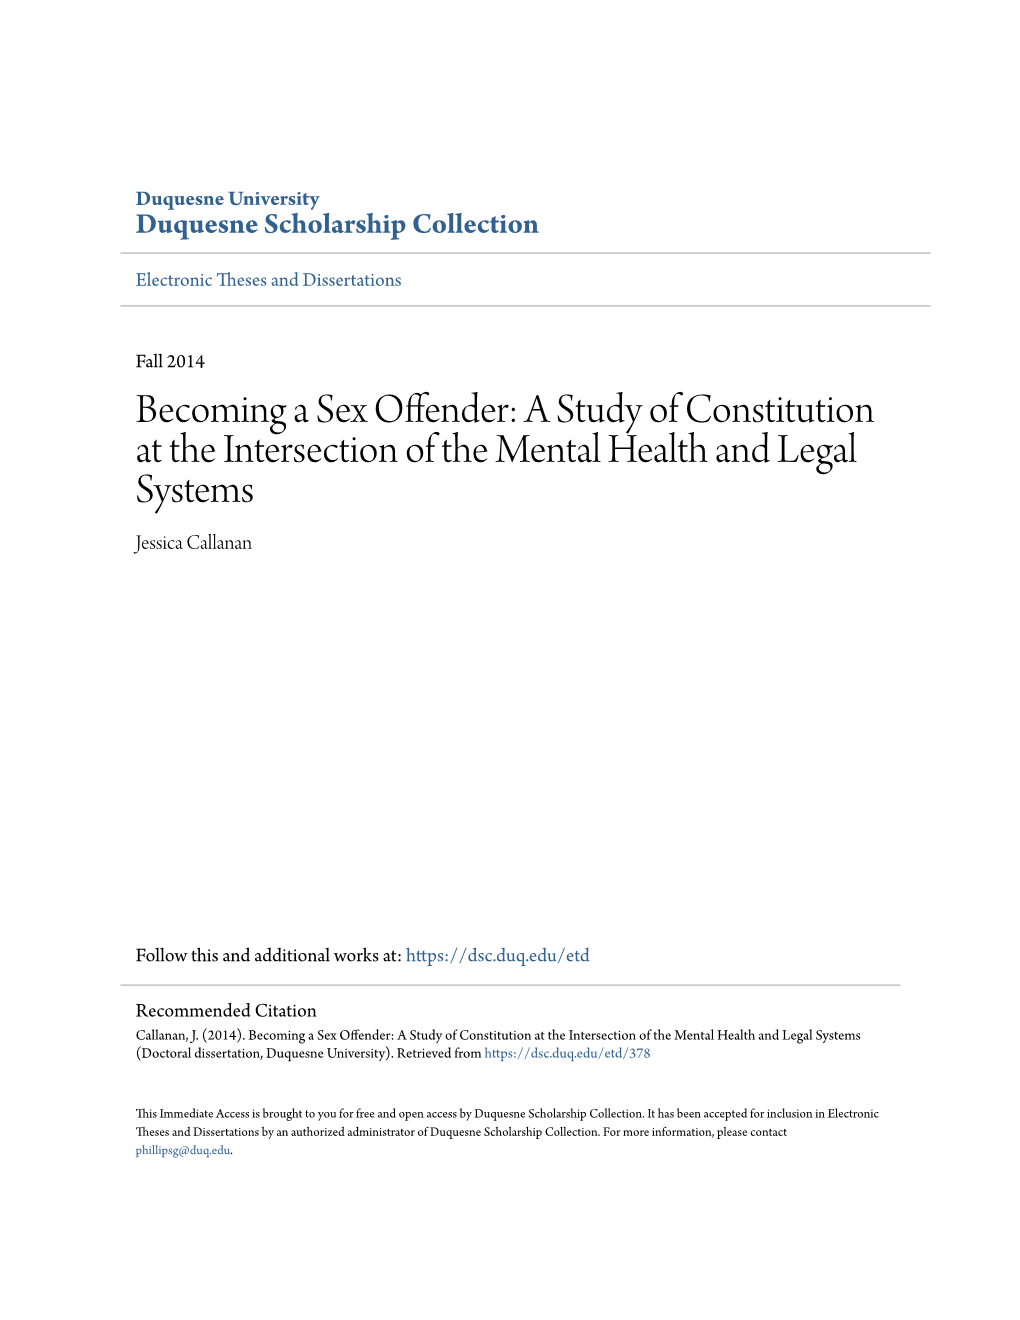 Becoming a Sex Offender: a Study of Constitution at the Intersection of the Mental Health and Legal Systems Jessica Callanan